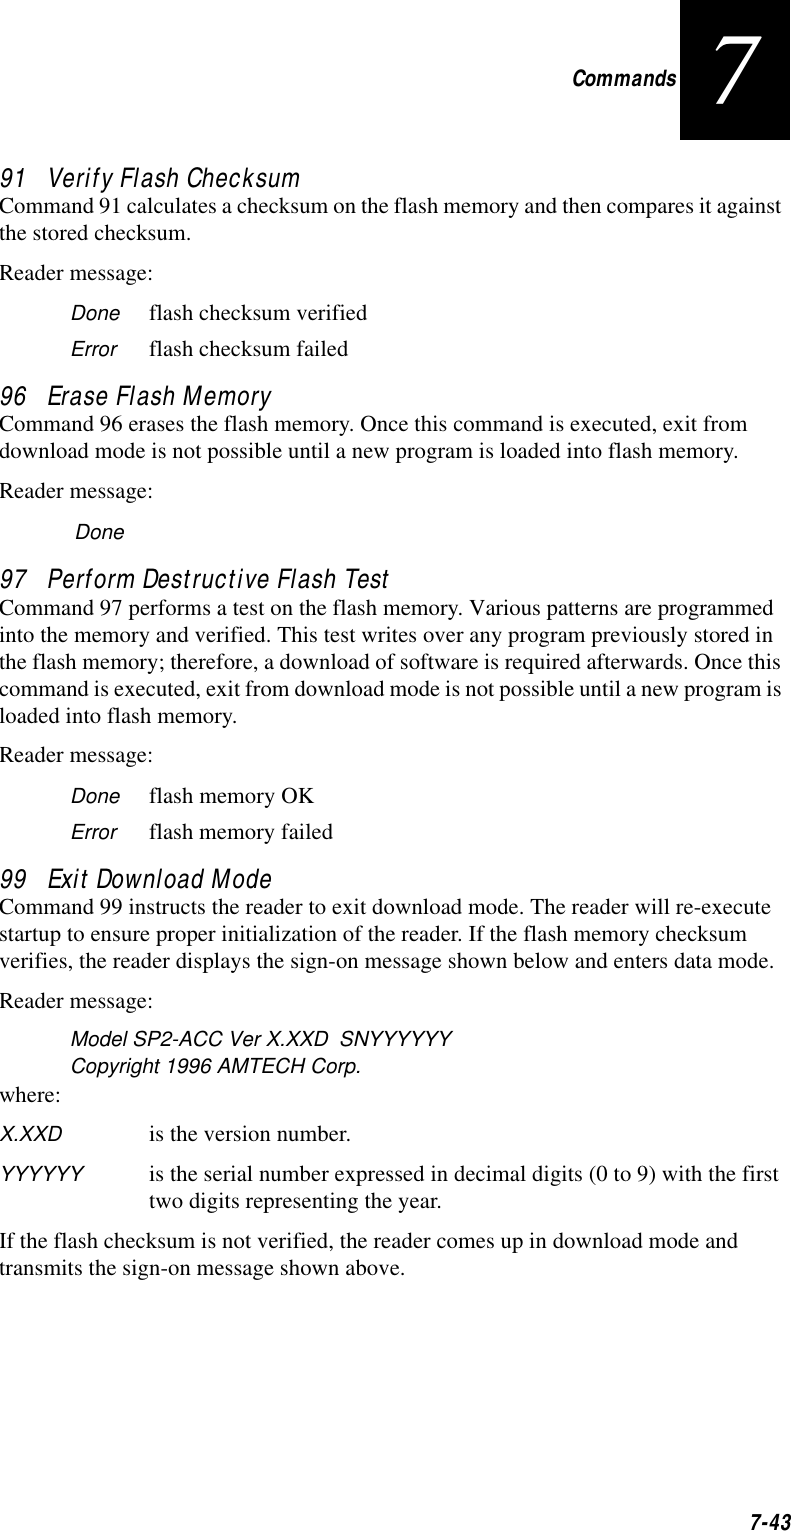 Commands7-43791   Verify Flash ChecksumCommand 91 calculates a checksum on the flash memory and then compares it against the stored checksum.Reader message:Done flash checksum verifiedError flash checksum failed96   Erase Flash MemoryCommand 96 erases the flash memory. Once this command is executed, exit from download mode is not possible until a new program is loaded into flash memory.Reader message:Done97   Perform Destructive Flash TestCommand 97 performs a test on the flash memory. Various patterns are programmed into the memory and verified. This test writes over any program previously stored in the flash memory; therefore, a download of software is required afterwards. Once this command is executed, exit from download mode is not possible until a new program is loaded into flash memory.Reader message:Done flash memory OKError flash memory failed99   Exit Download ModeCommand 99 instructs the reader to exit download mode. The reader will re-execute startup to ensure proper initialization of the reader. If the flash memory checksum verifies, the reader displays the sign-on message shown below and enters data mode.Reader message:Model SP2-ACC Ver X.XXD  SNYYYYYYCopyright 1996 AMTECH Corp.where:X.XXD is the version number.YYYYYY is the serial number expressed in decimal digits (0 to 9) with the first two digits representing the year.If the flash checksum is not verified, the reader comes up in download mode and transmits the sign-on message shown above.